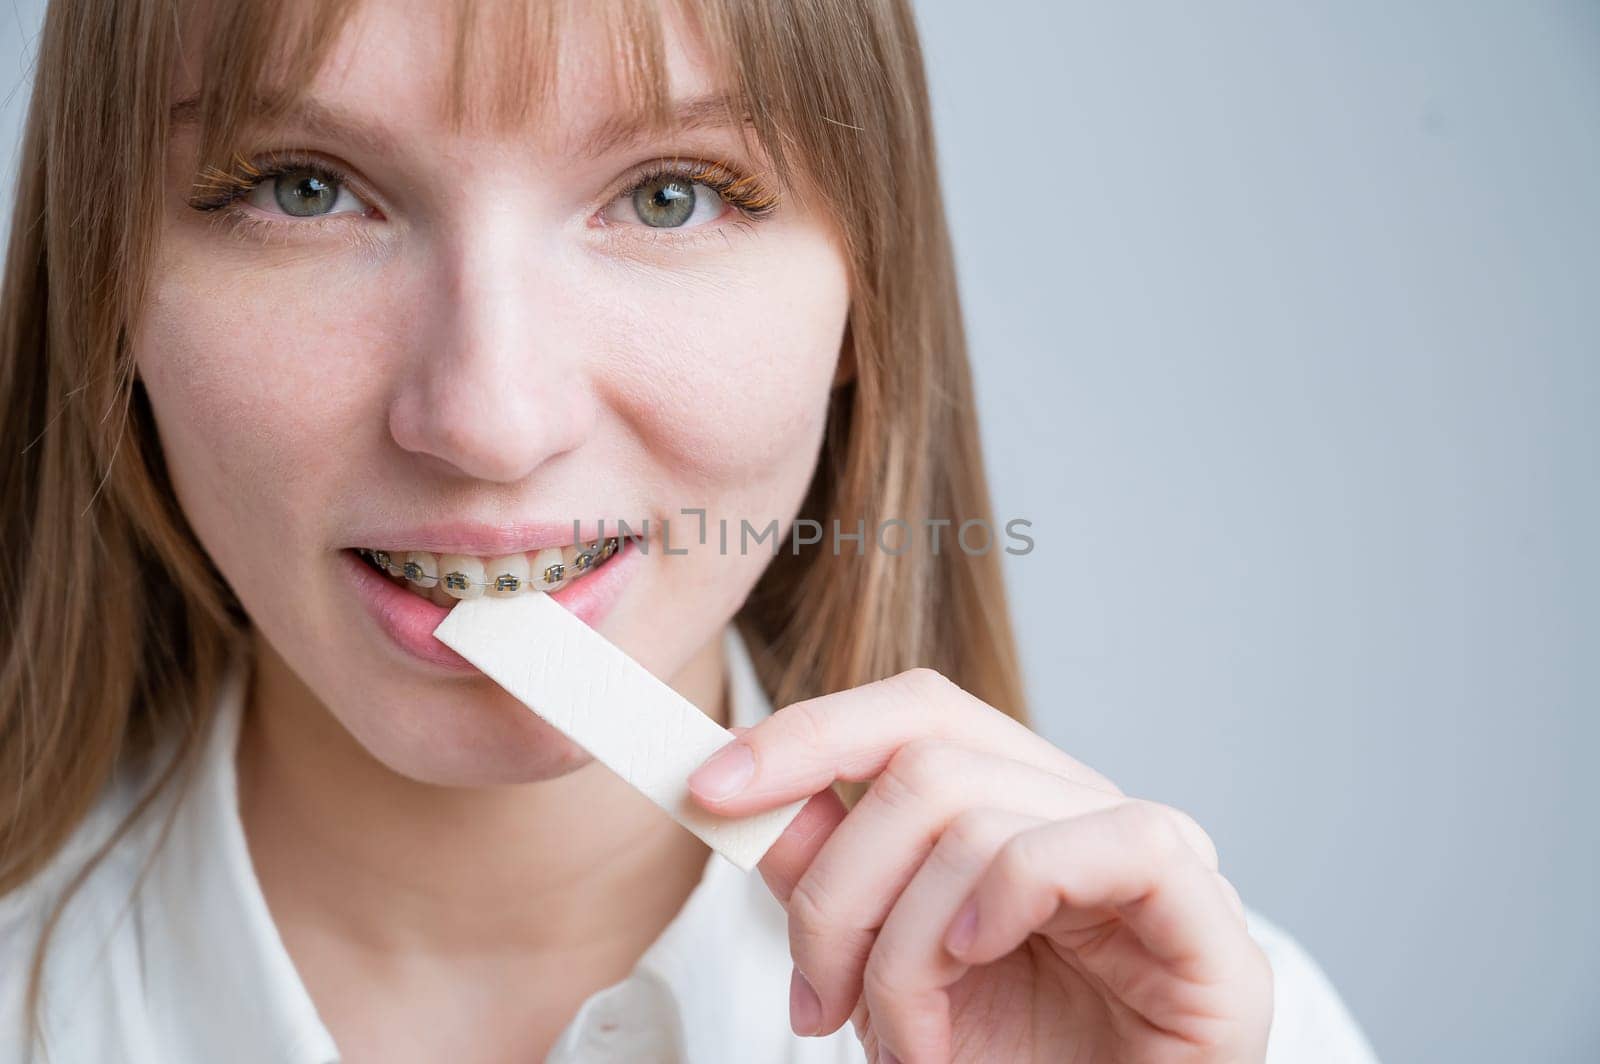 Young woman with metal braces on her teeth is chewing gum. Copy space